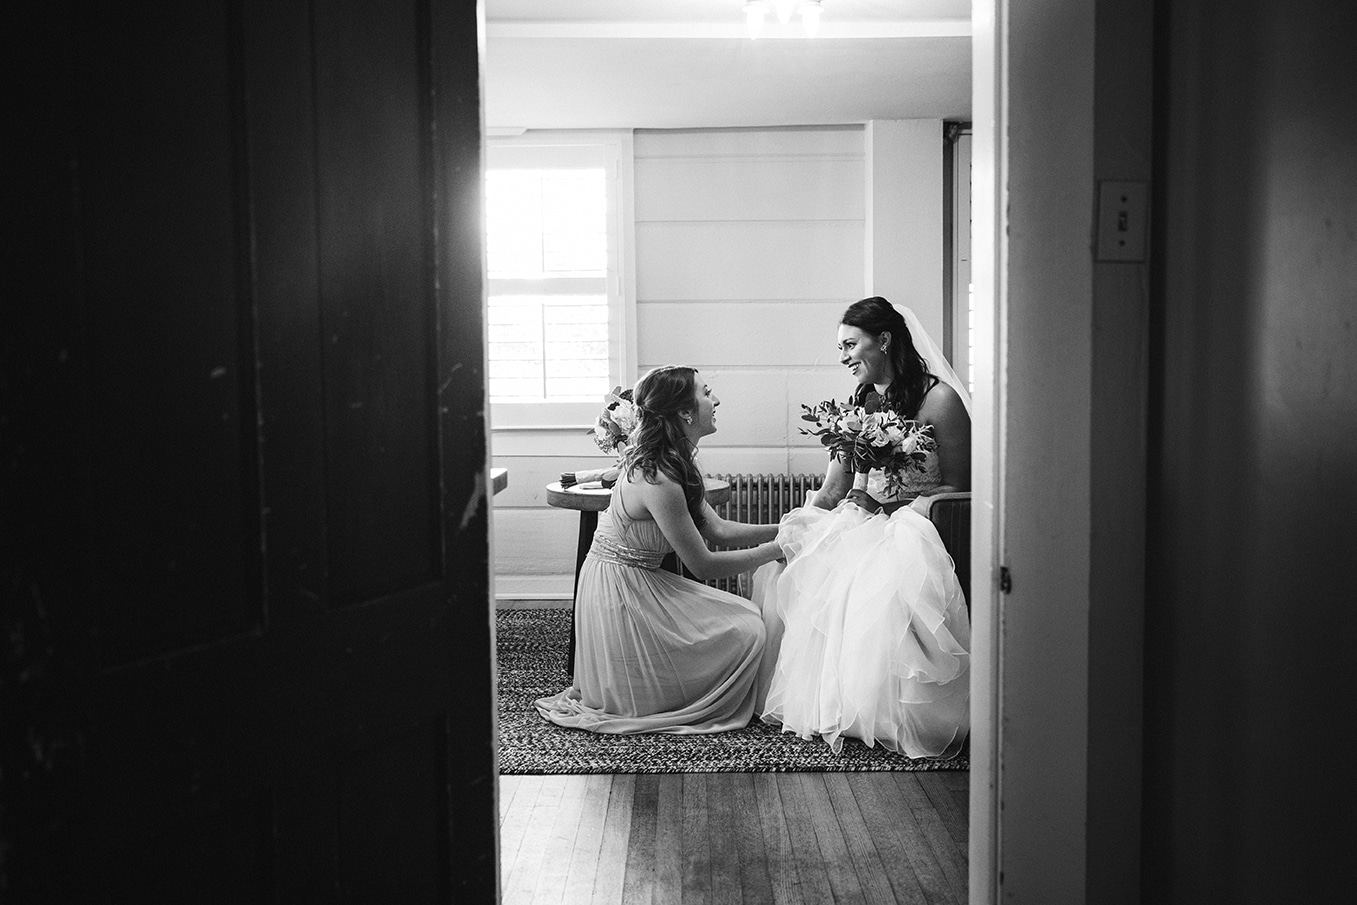 This documentary photograph of bride and bridesmaid talking before the ceremony is one of the best wedding photographs of 2016